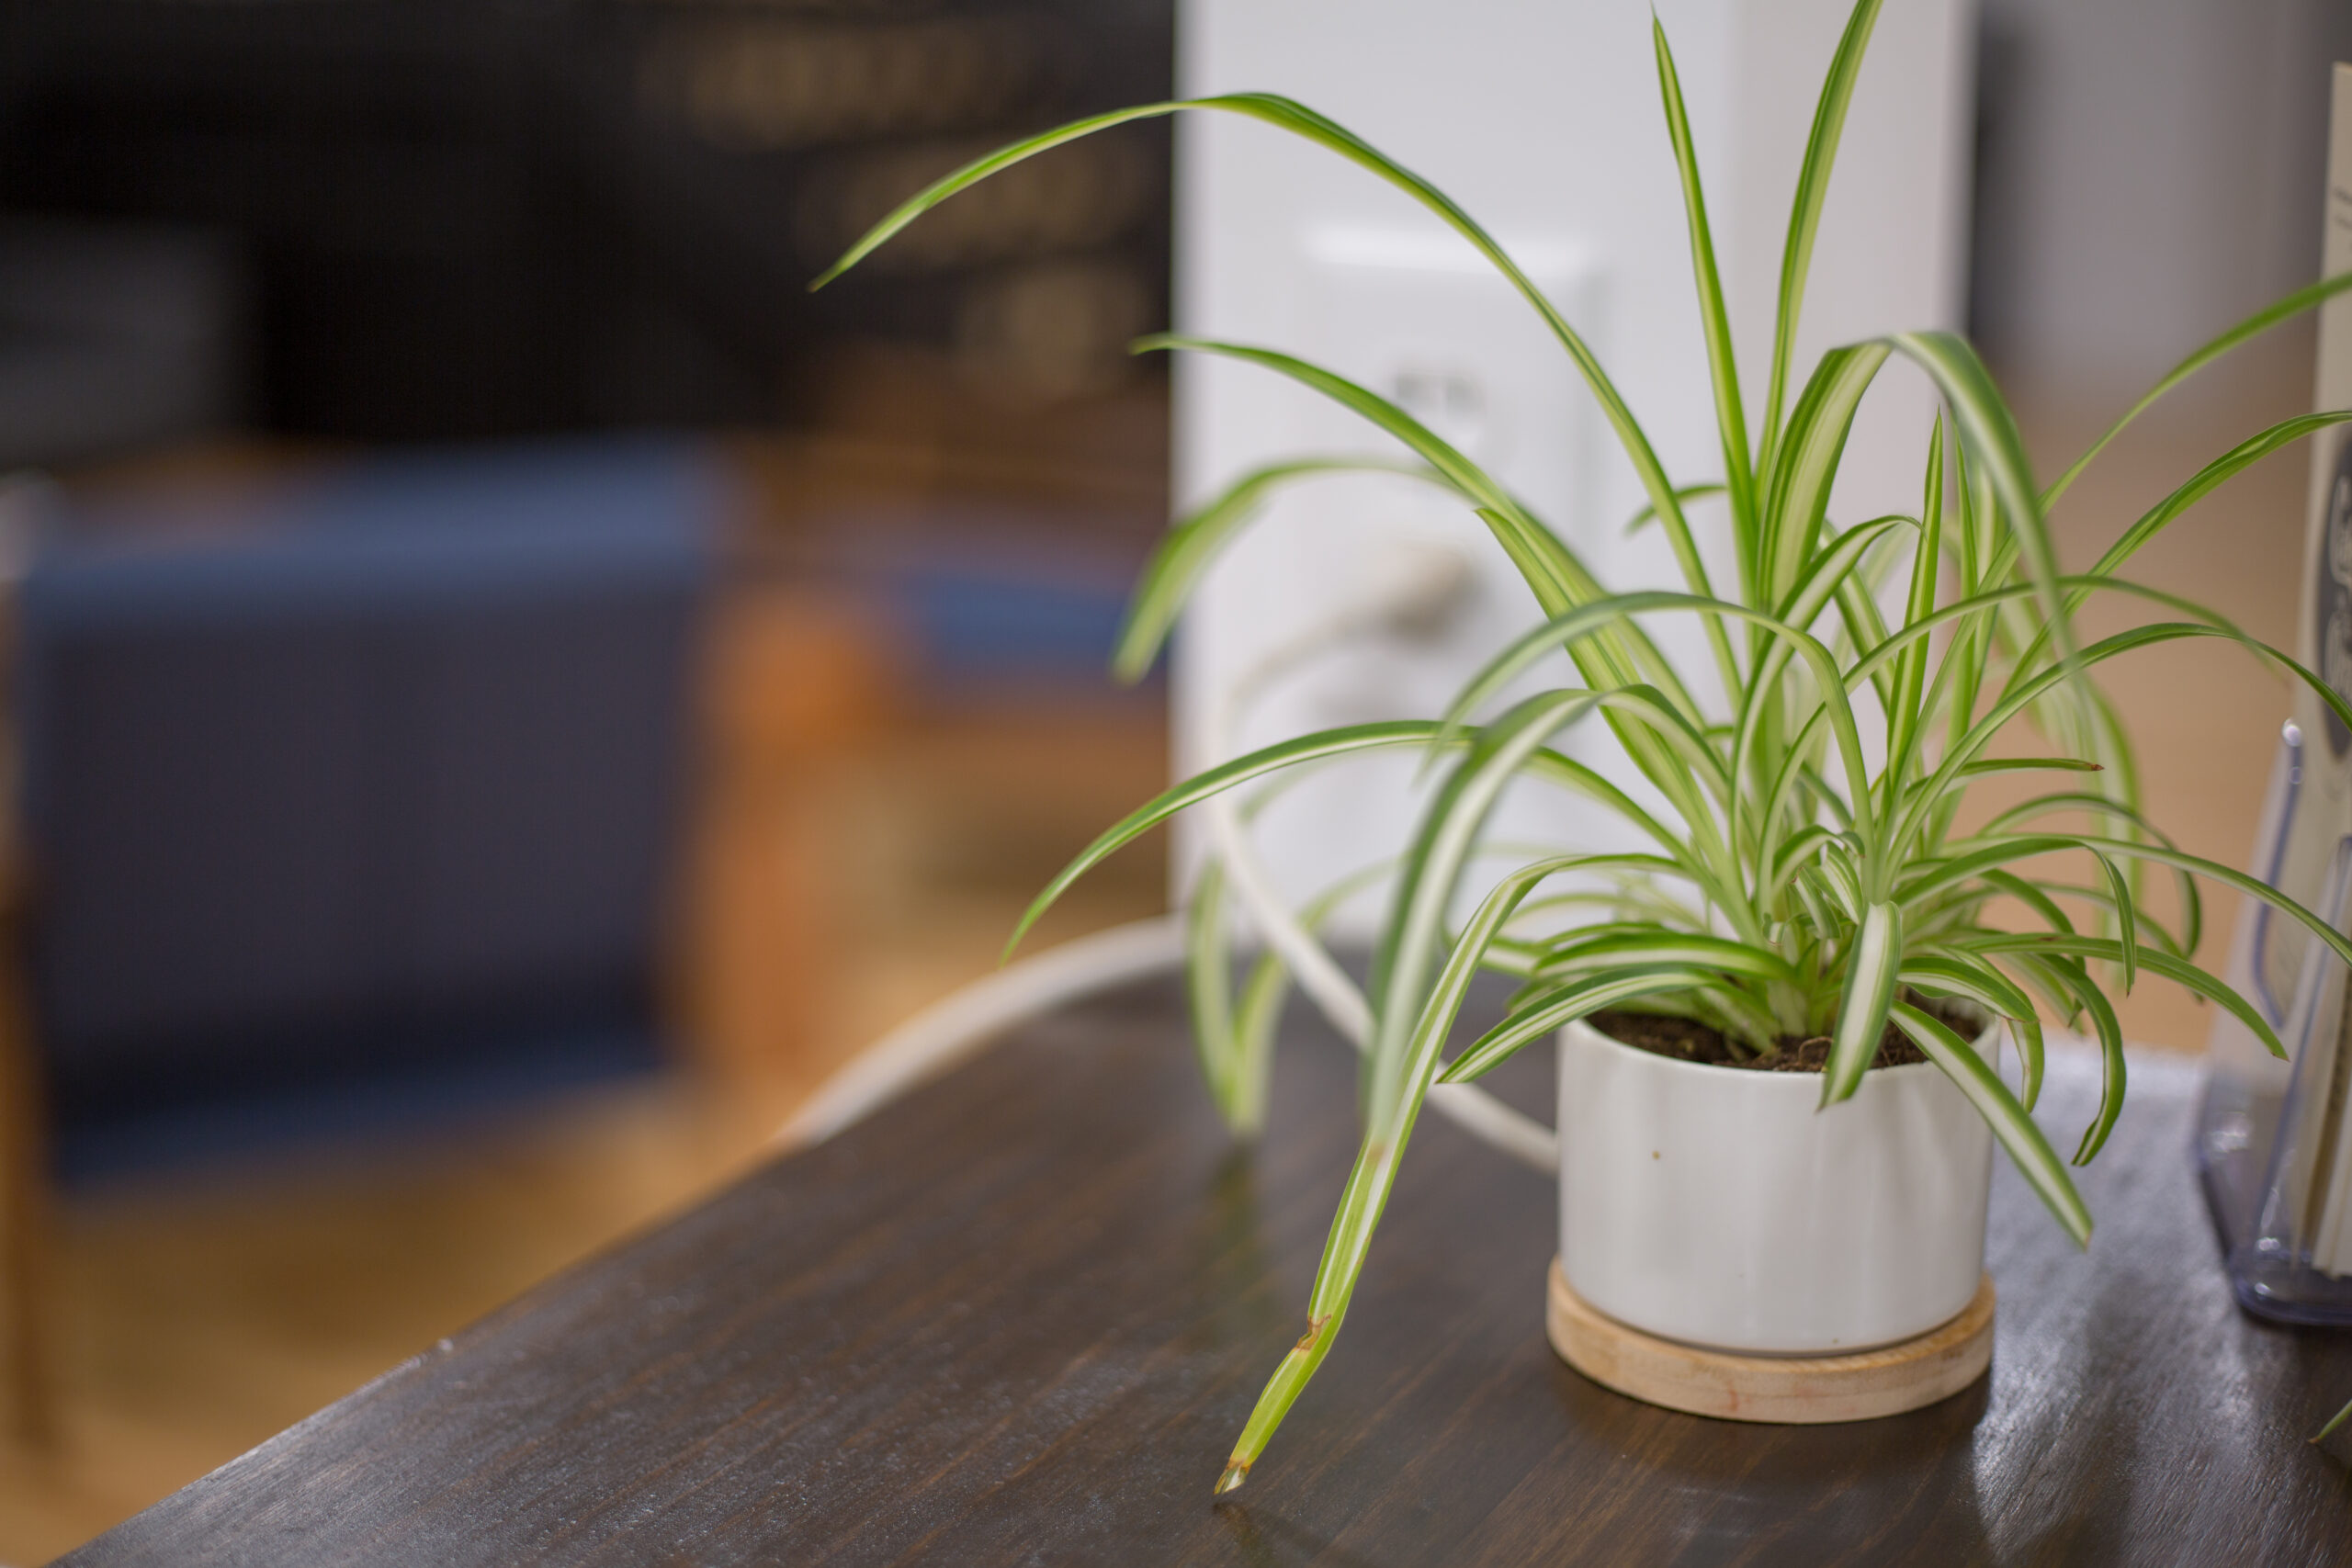 How Do You Revive A Dying Spider Plant?